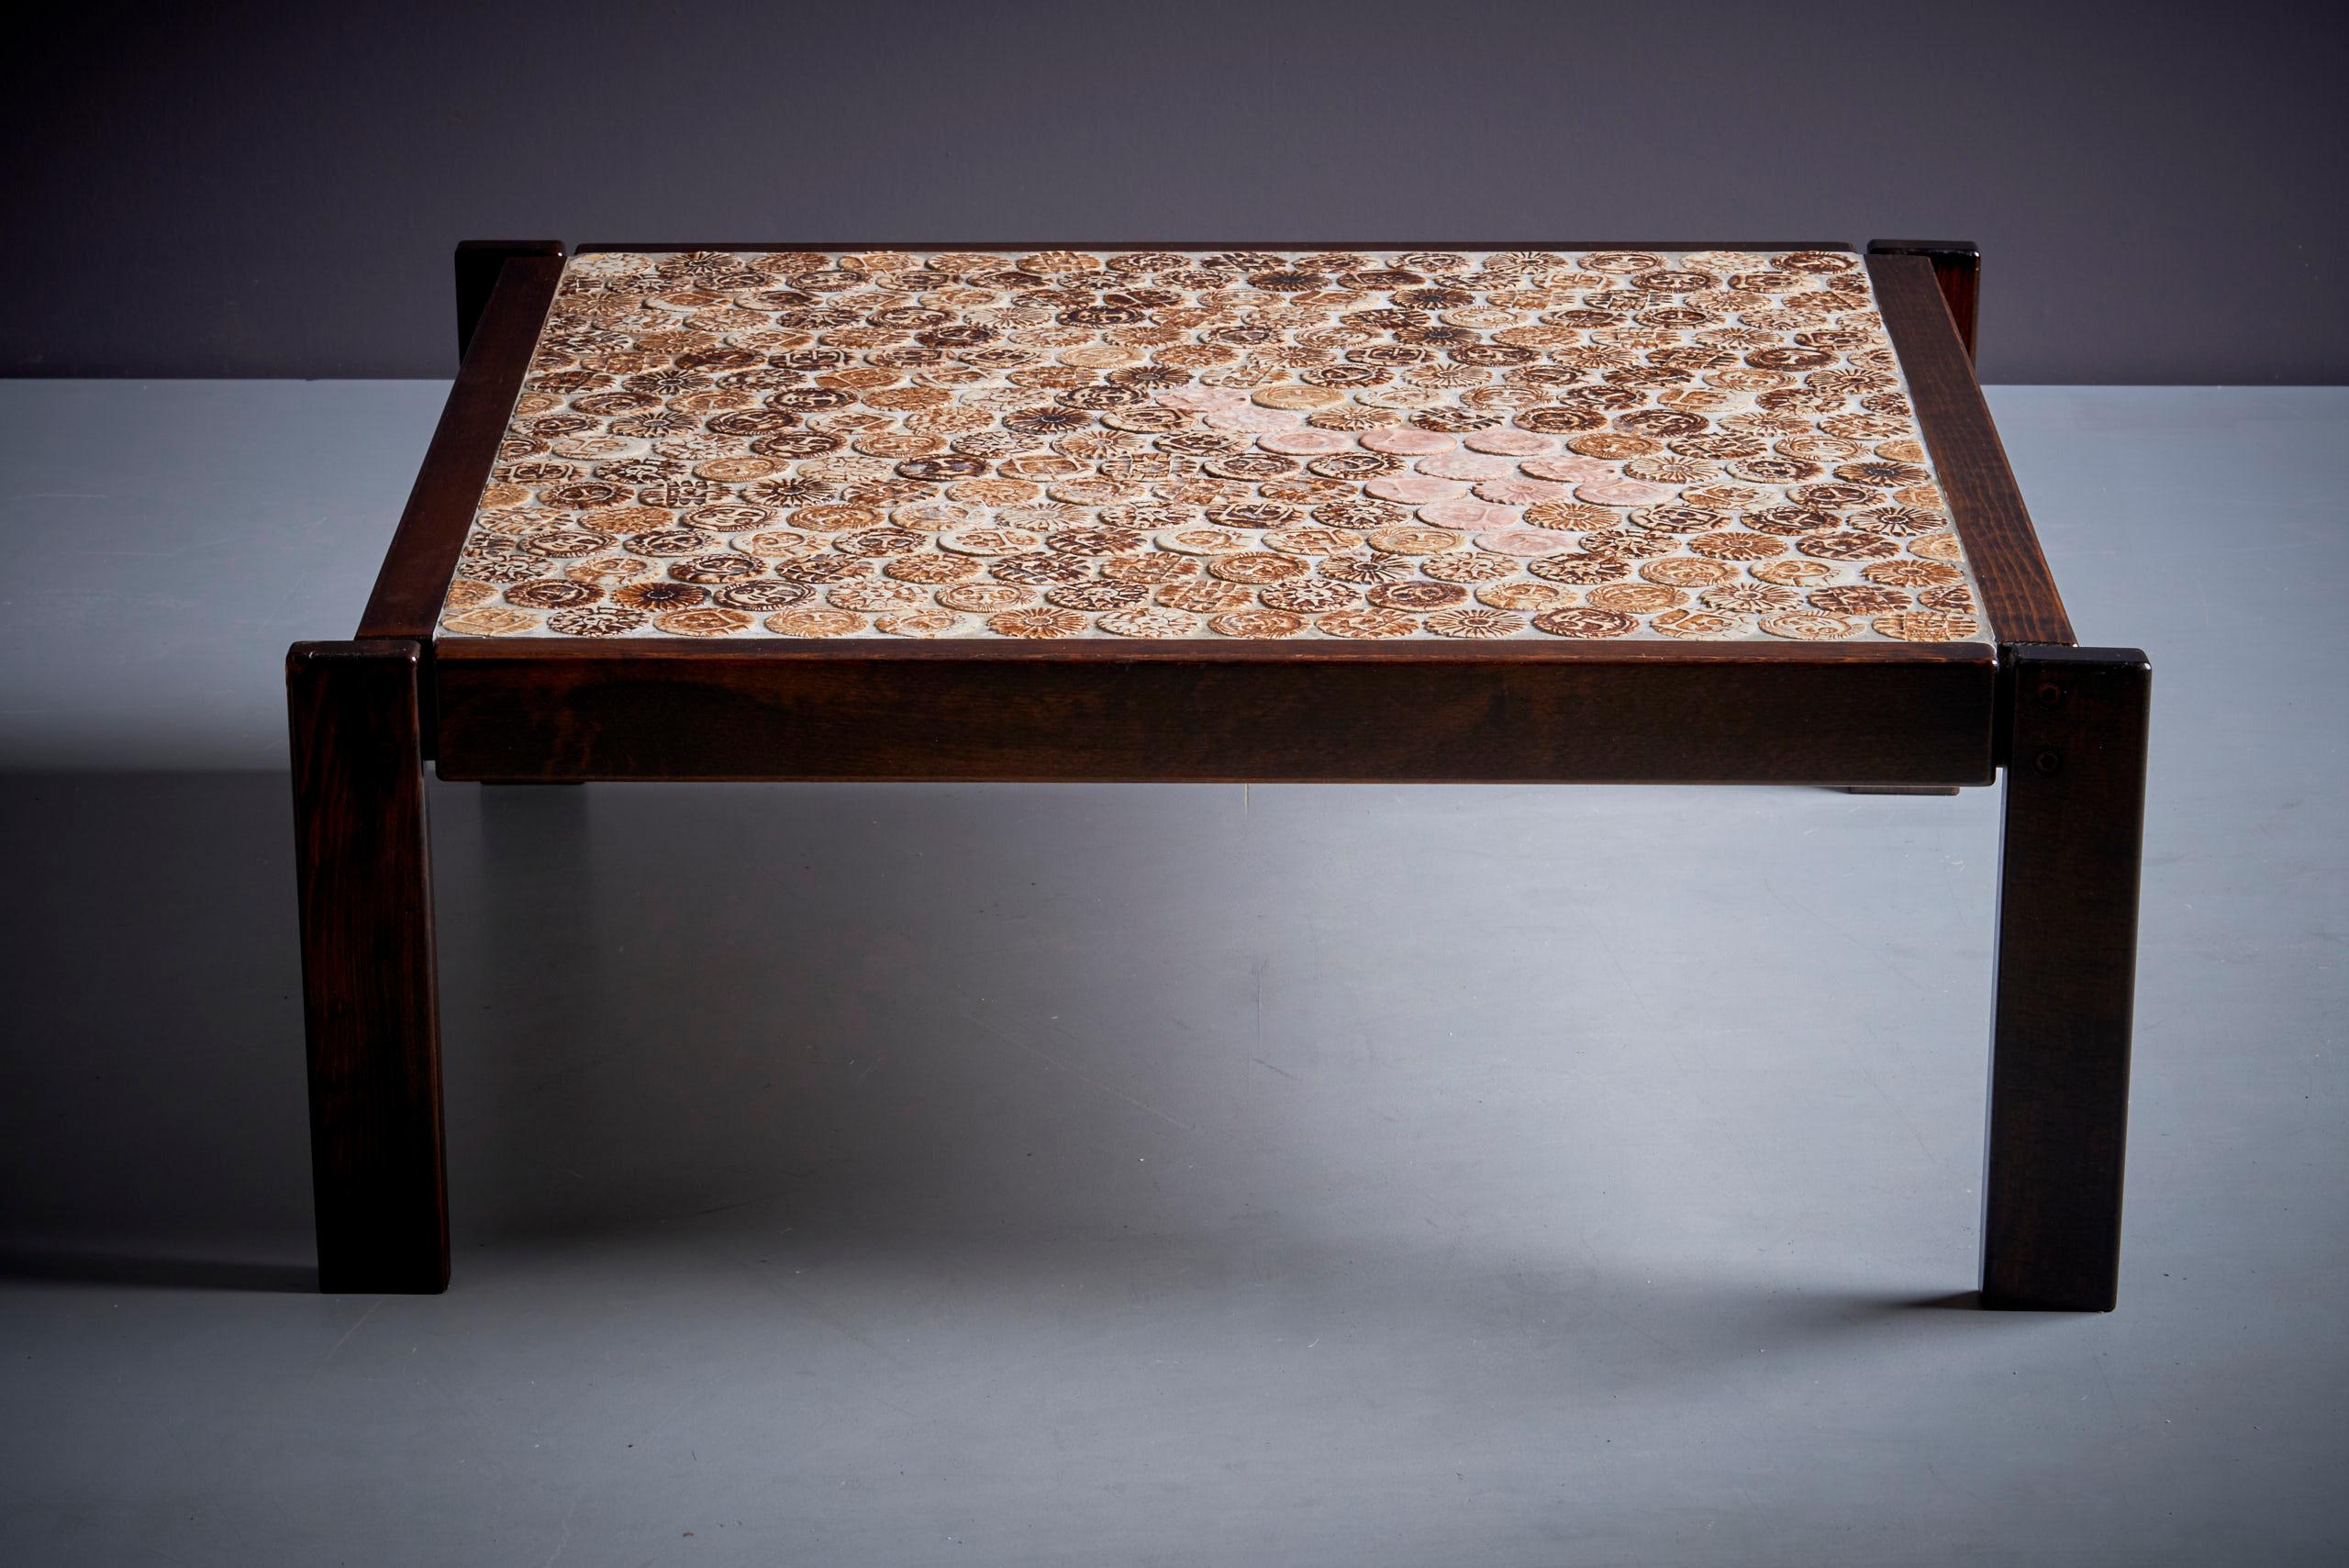 Roger Capron Coffee Table, France - 1970s. Price on request.